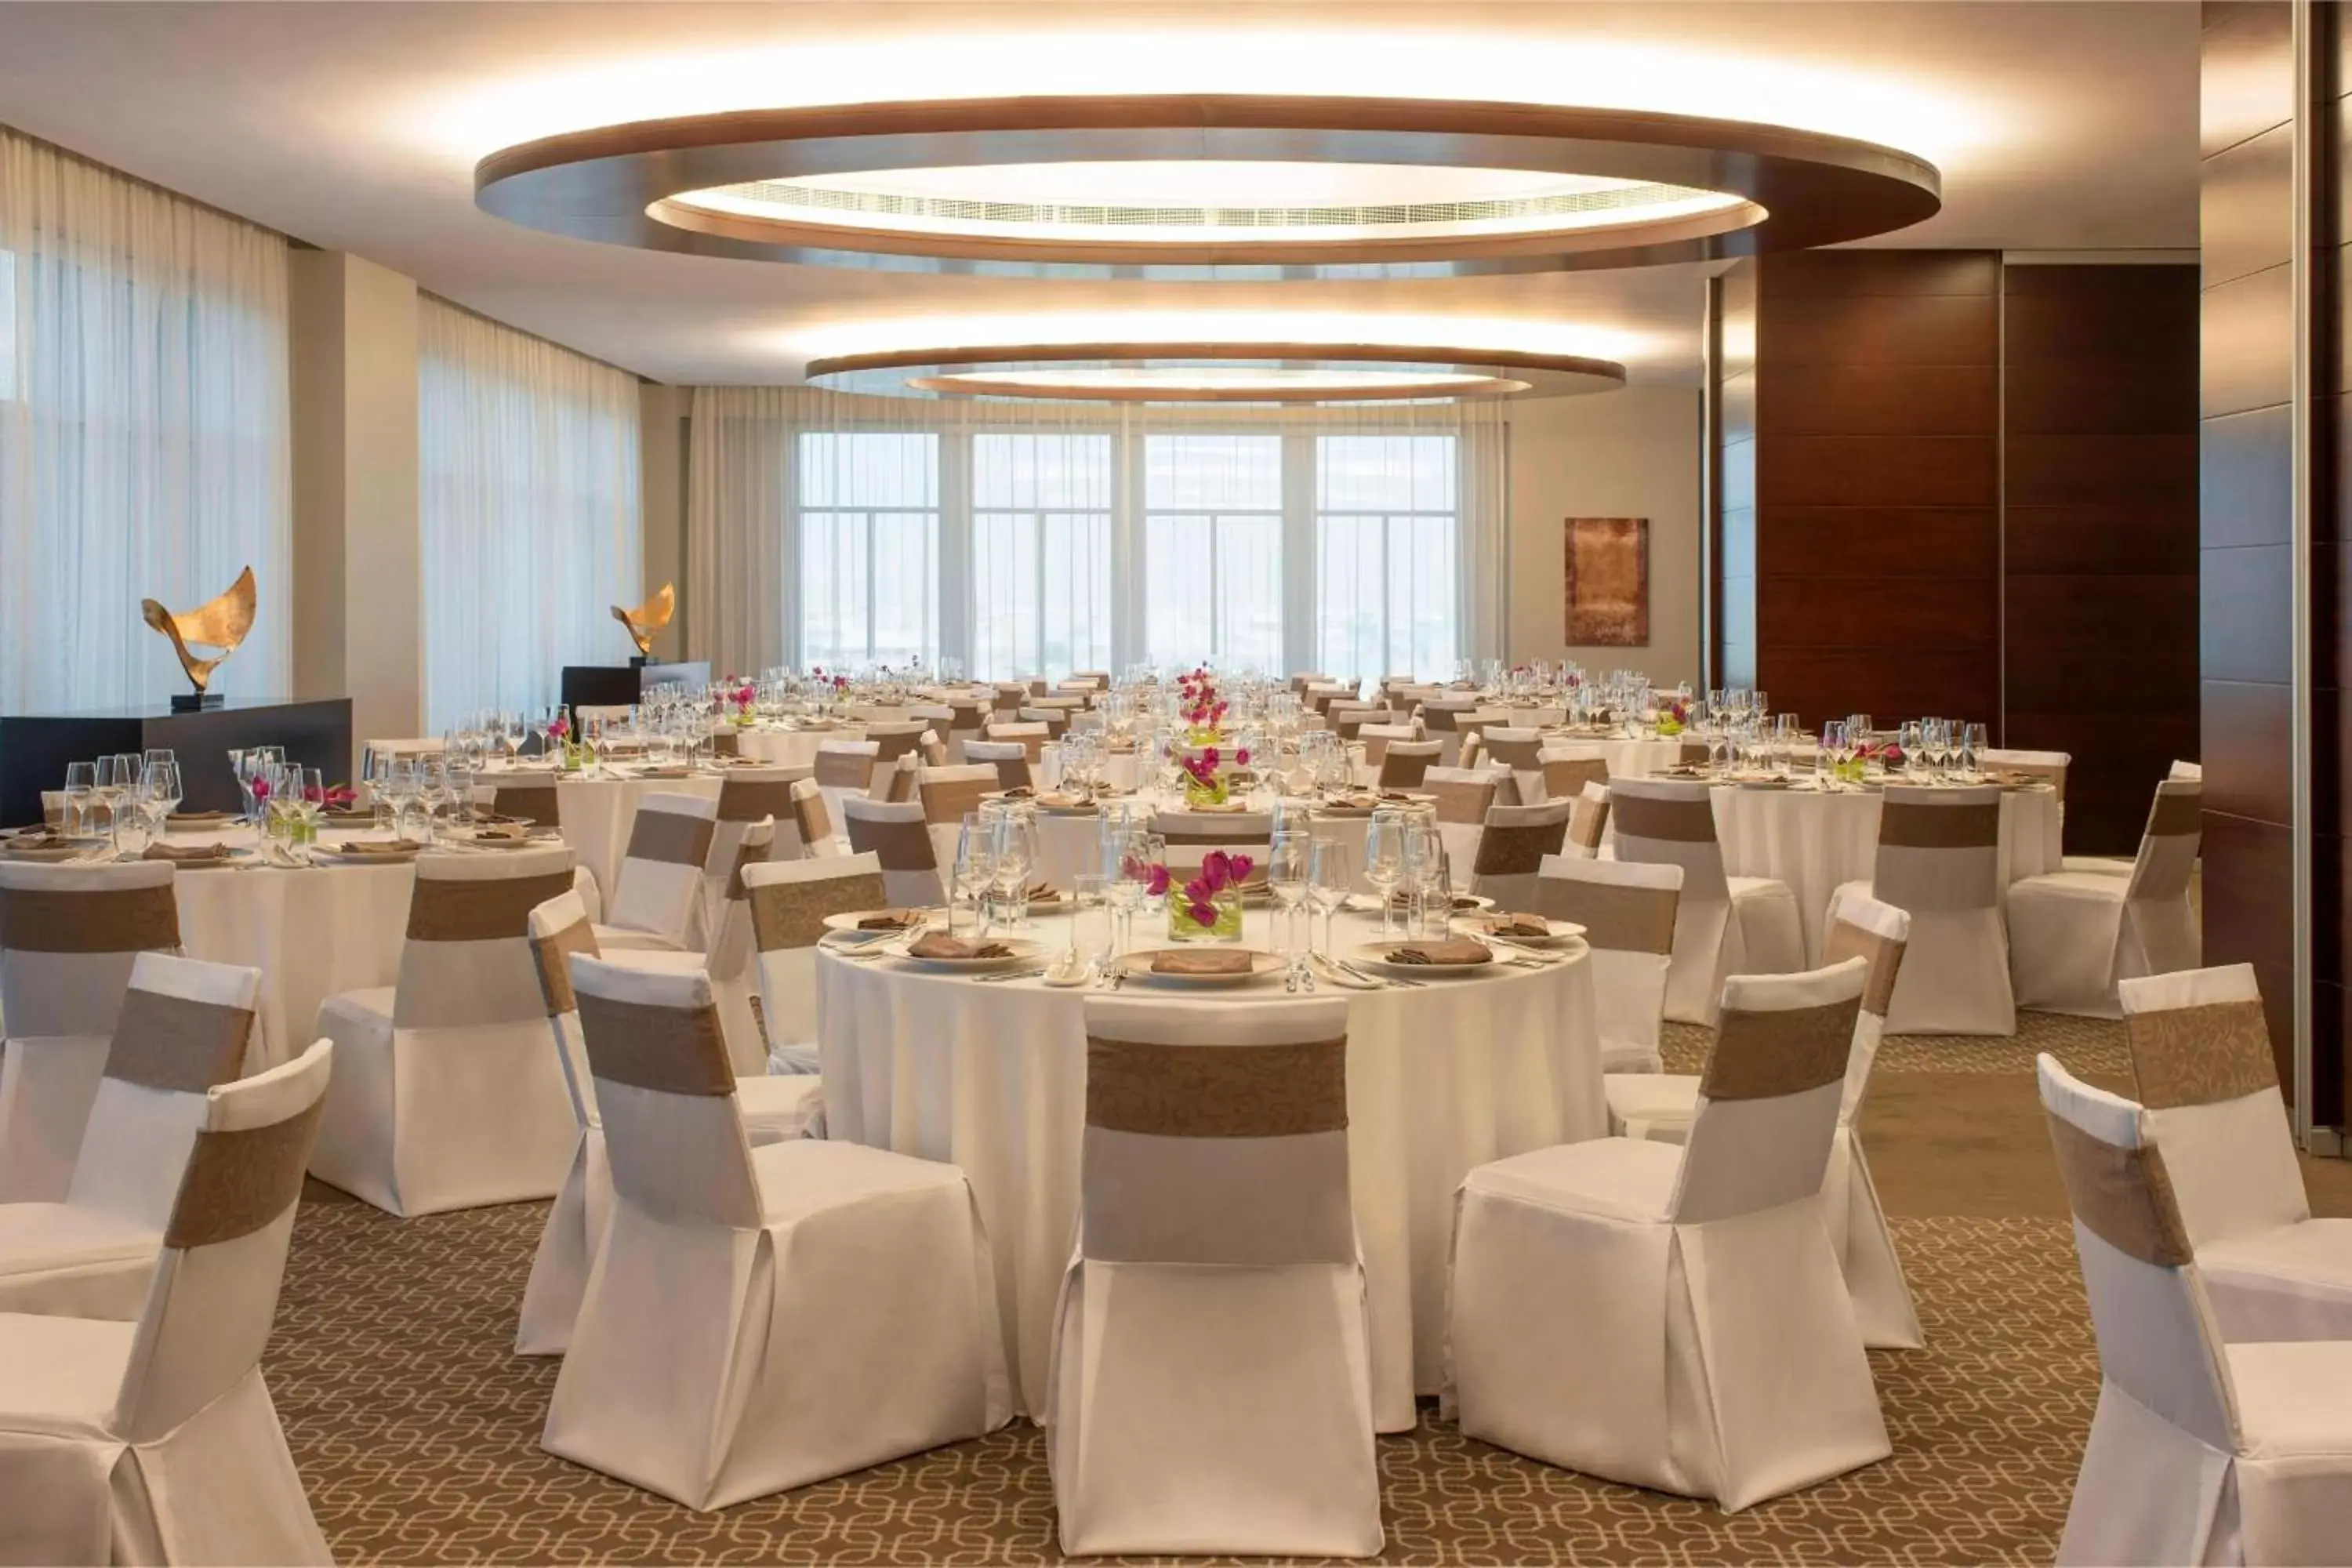 Meeting/conference room, Banquet Facilities in Sheraton Mall of the Emirates Hotel, Dubai